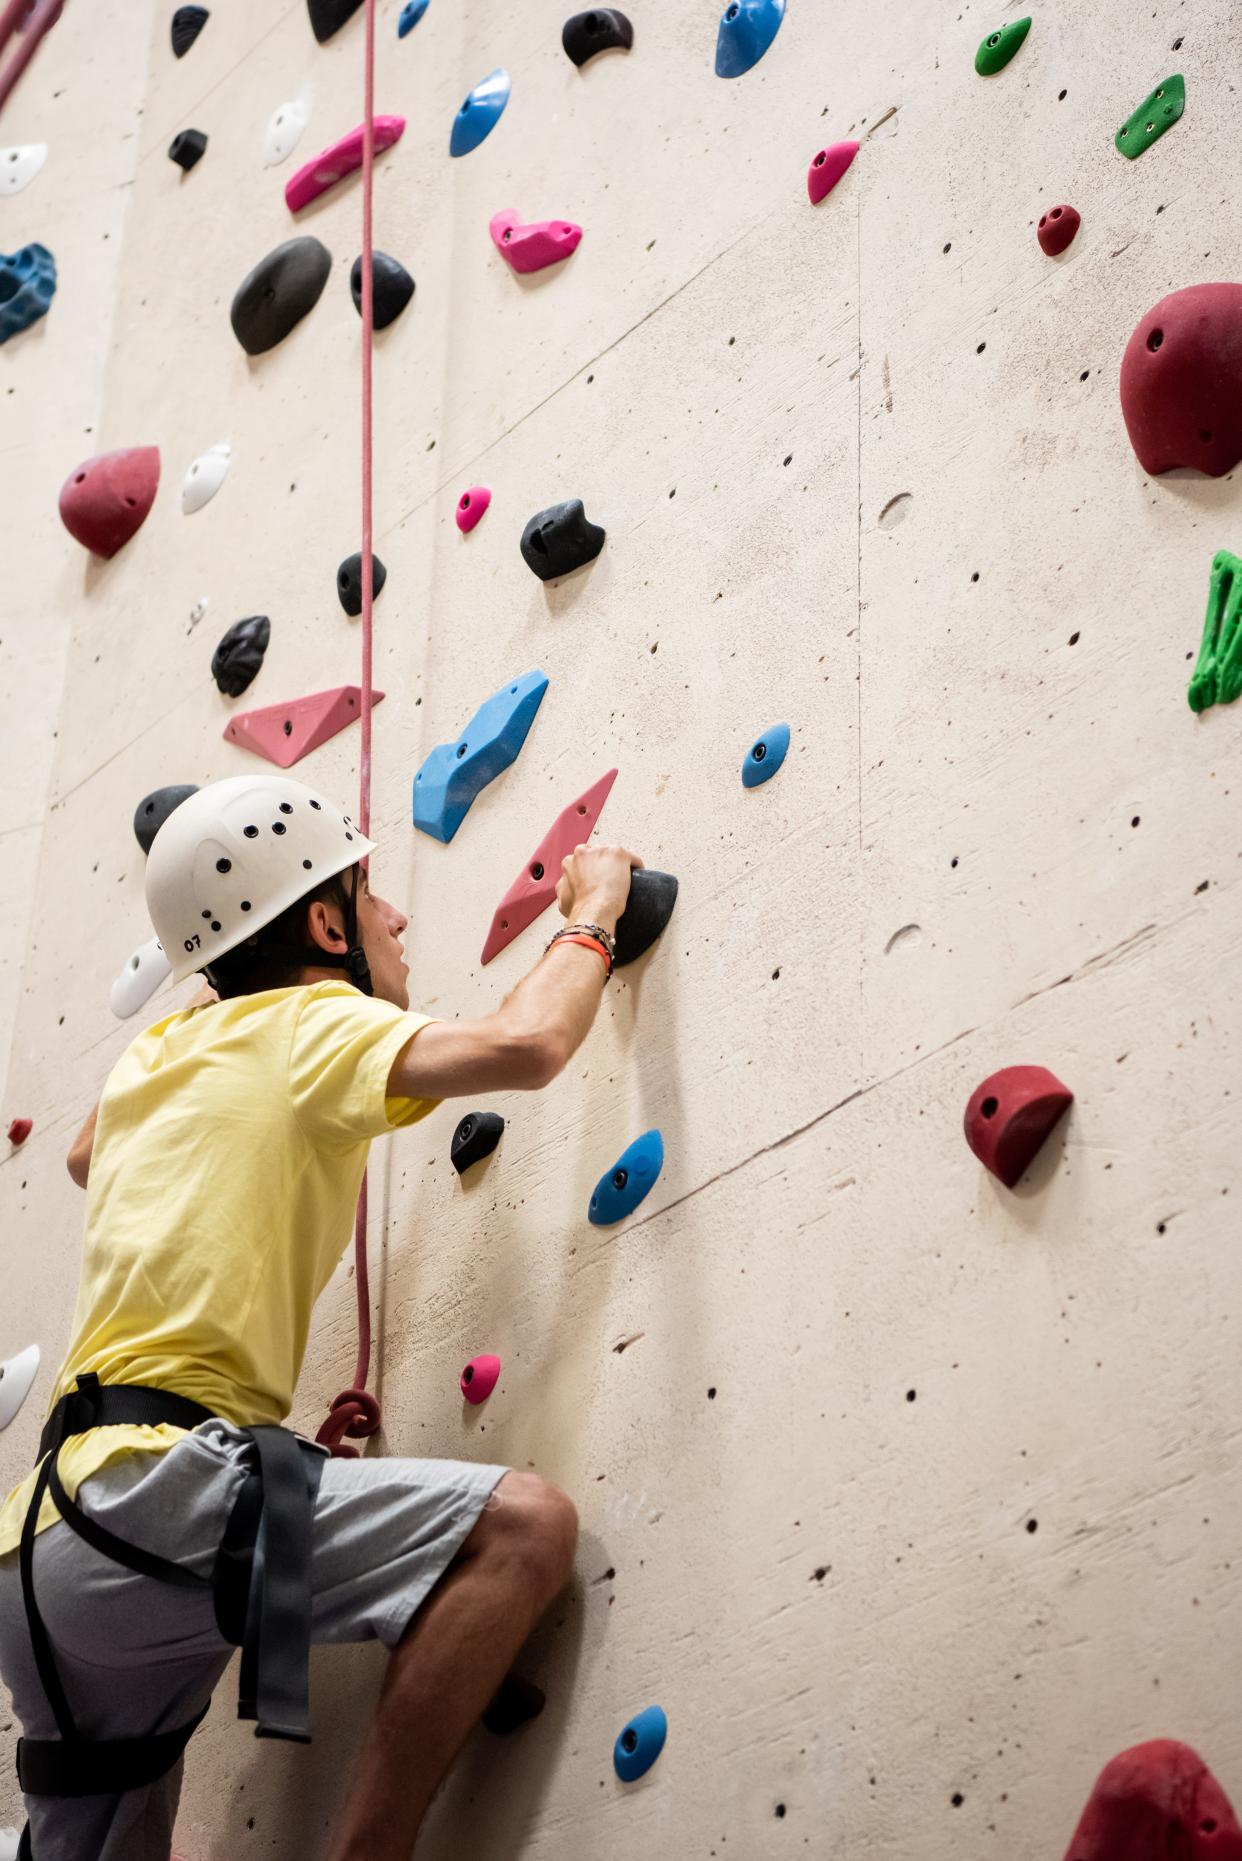 Jagger Packlaian, of Doylestown, participates in an excursion to the Doylestown Rock Gym in Doylestown Township, as part of The Next Step Program's Explore Bucks County program, on Wednesday, July 20, 2022.